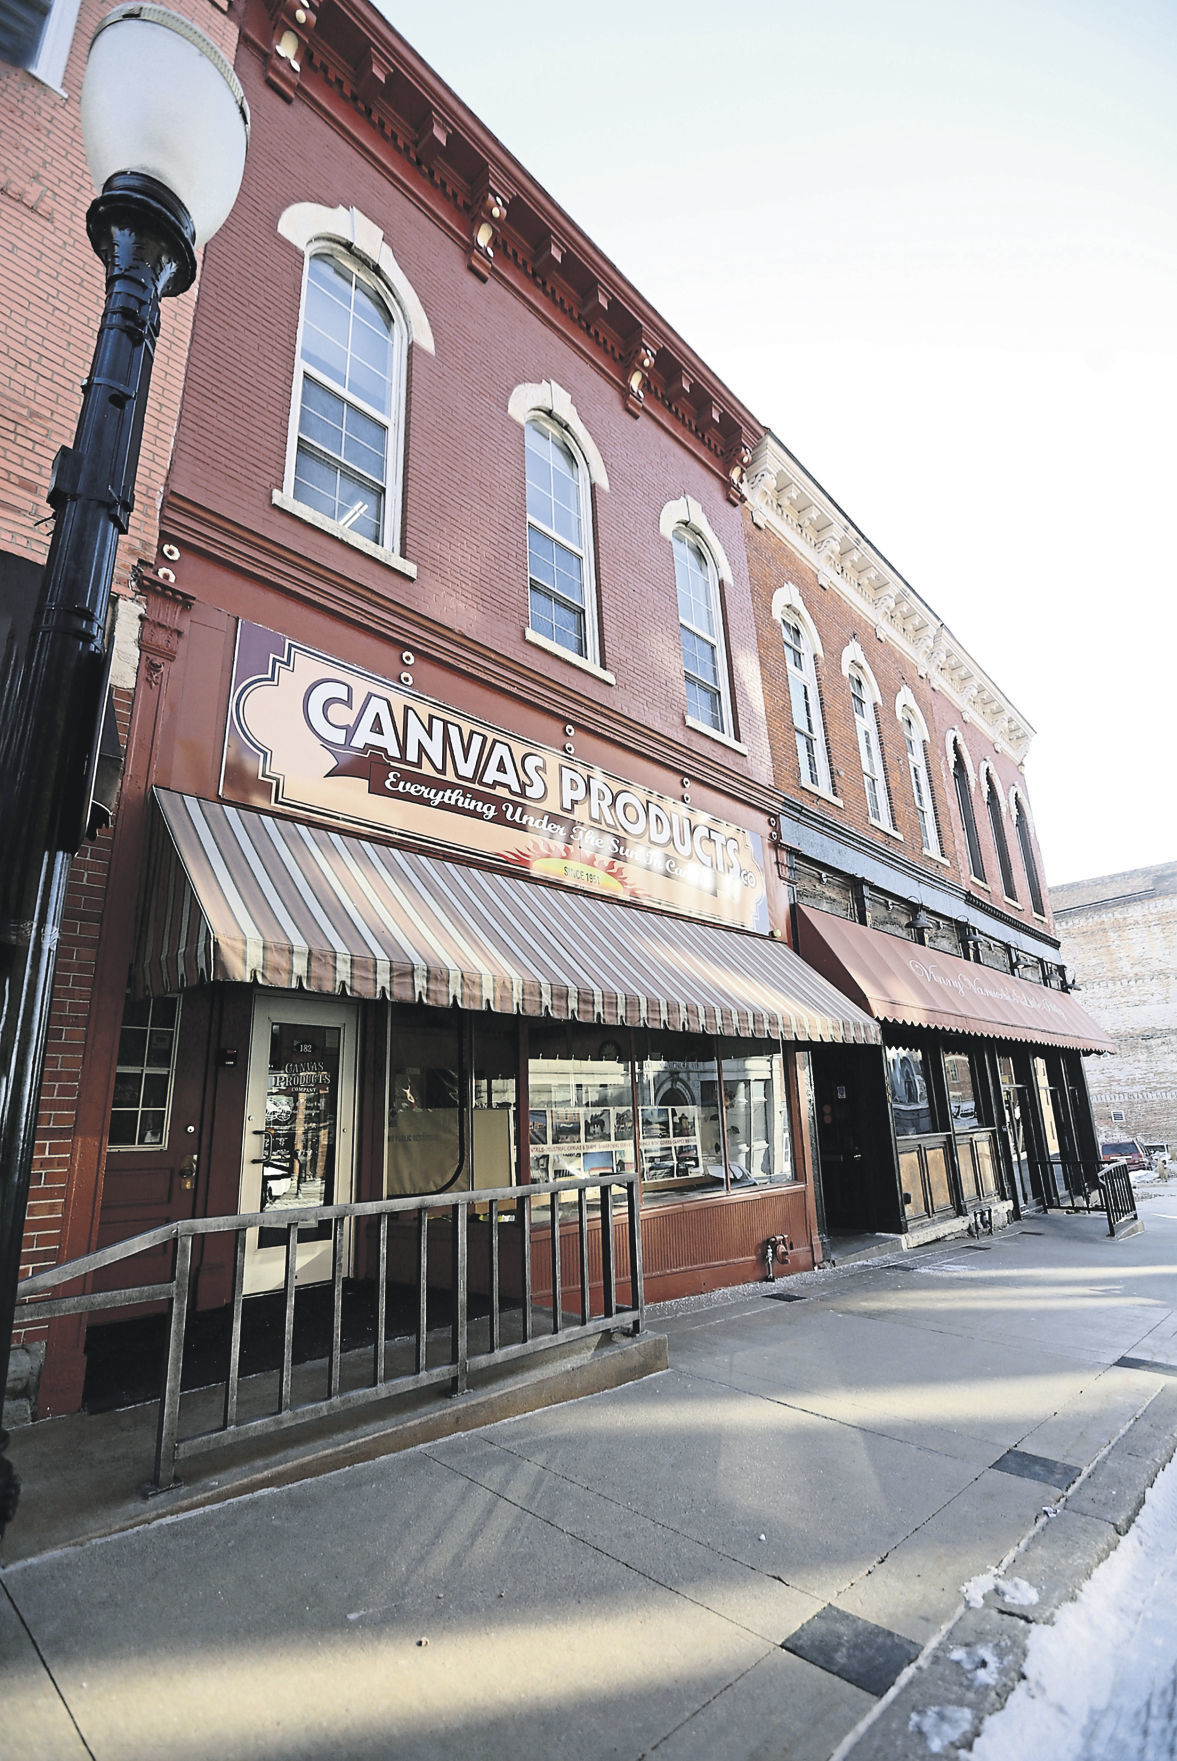 Canvas Products Co. is located at 182 Main Street, Dubuque.    PHOTO CREDIT: JESSICA REILLY